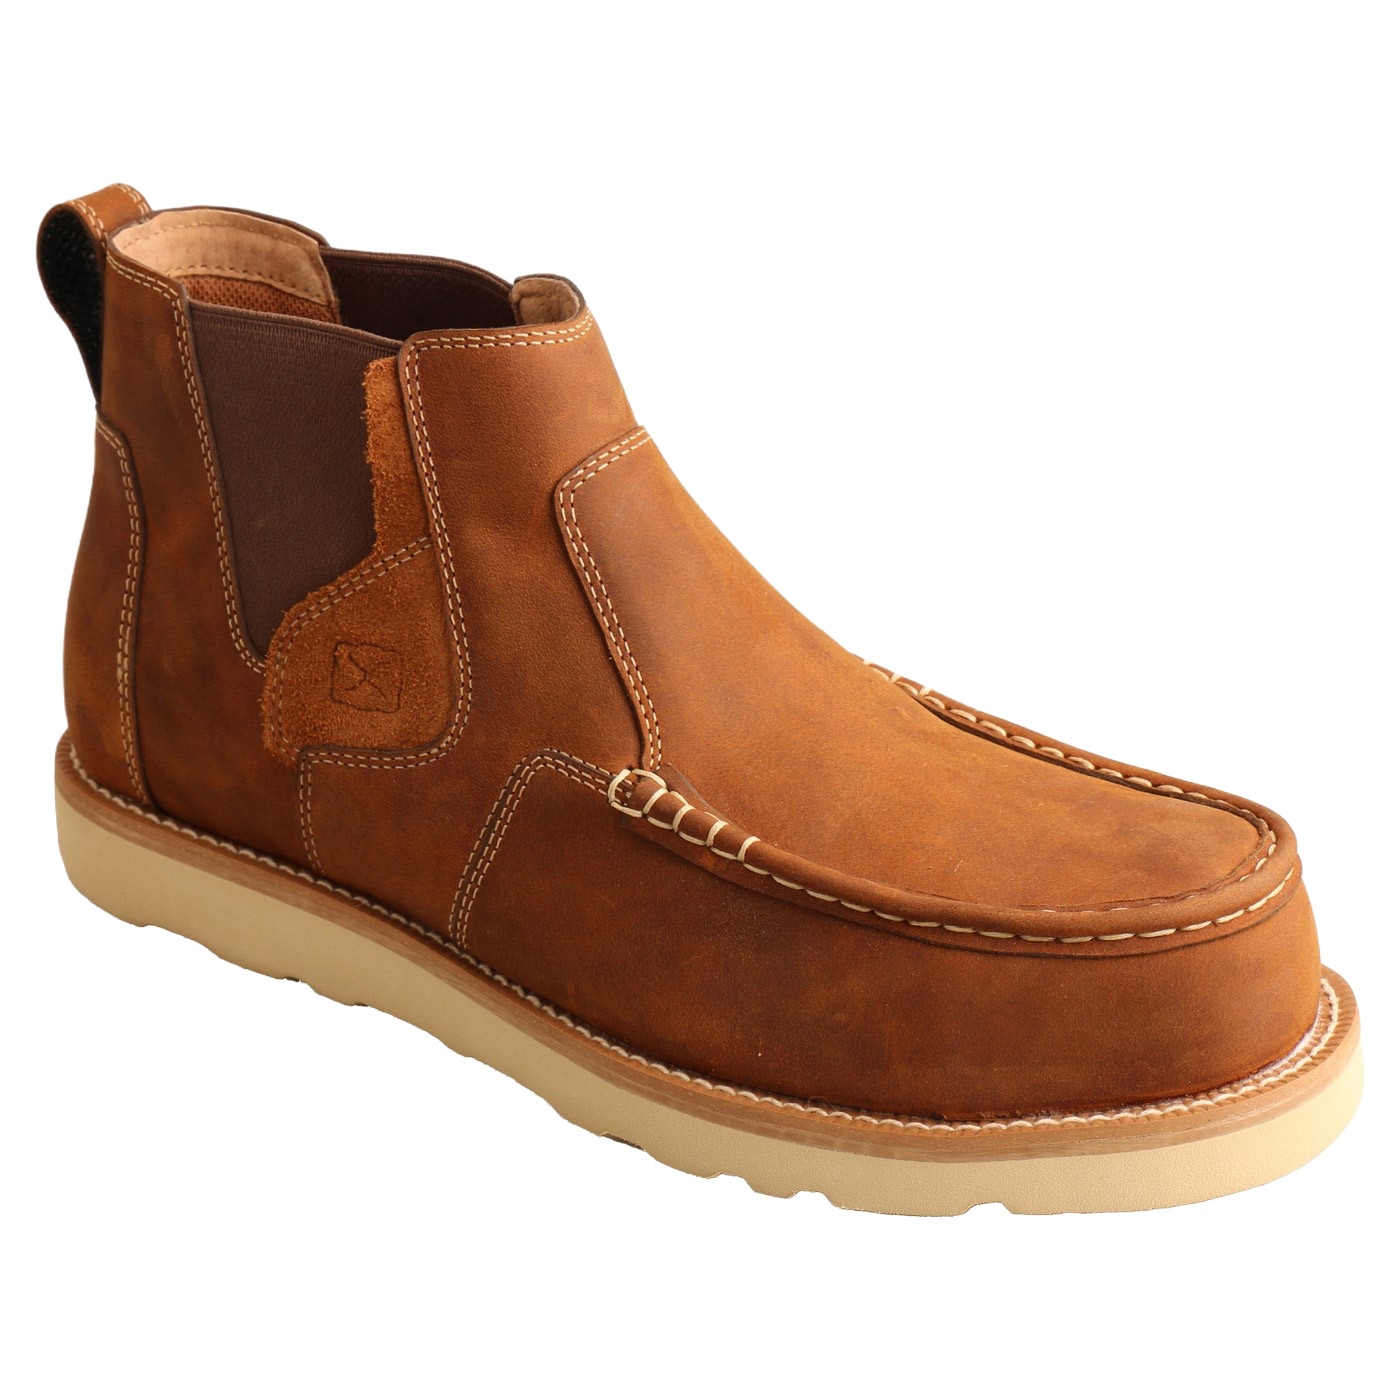 Twisted X Men's 4" Chelsea Wedge Sole Oiled Work Boots MCAN001